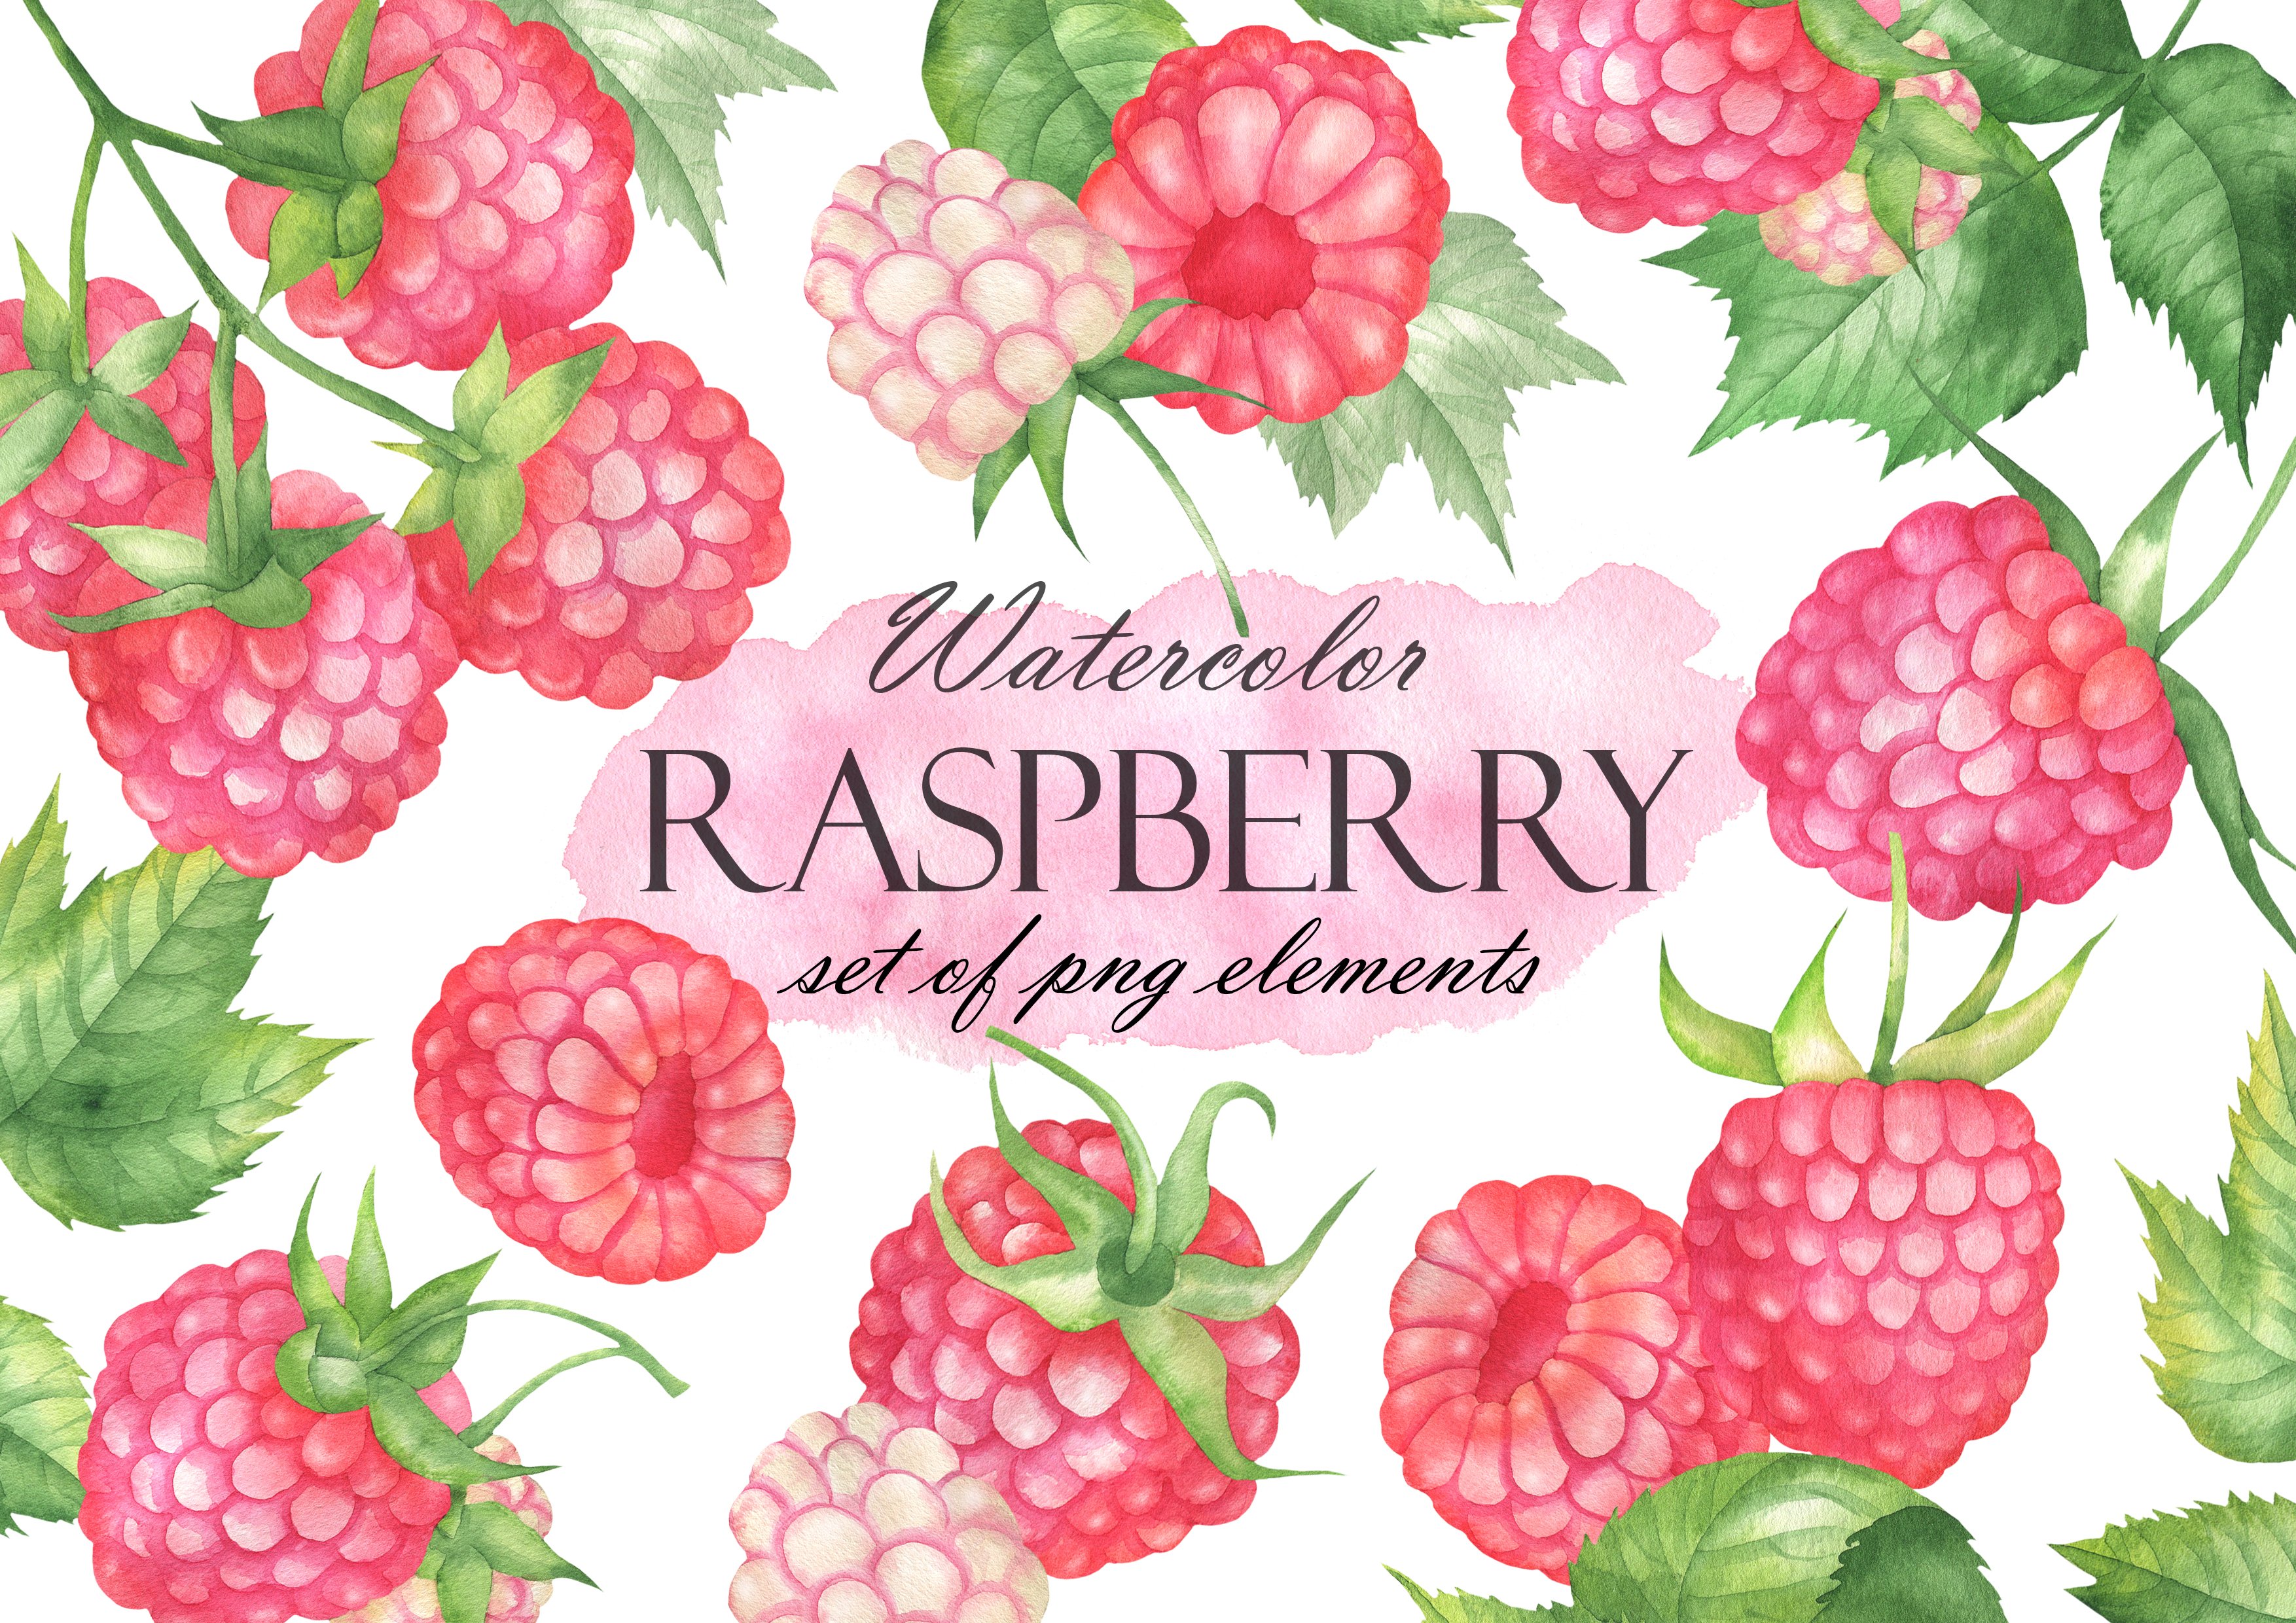 Watercolor Raspberry cover image.